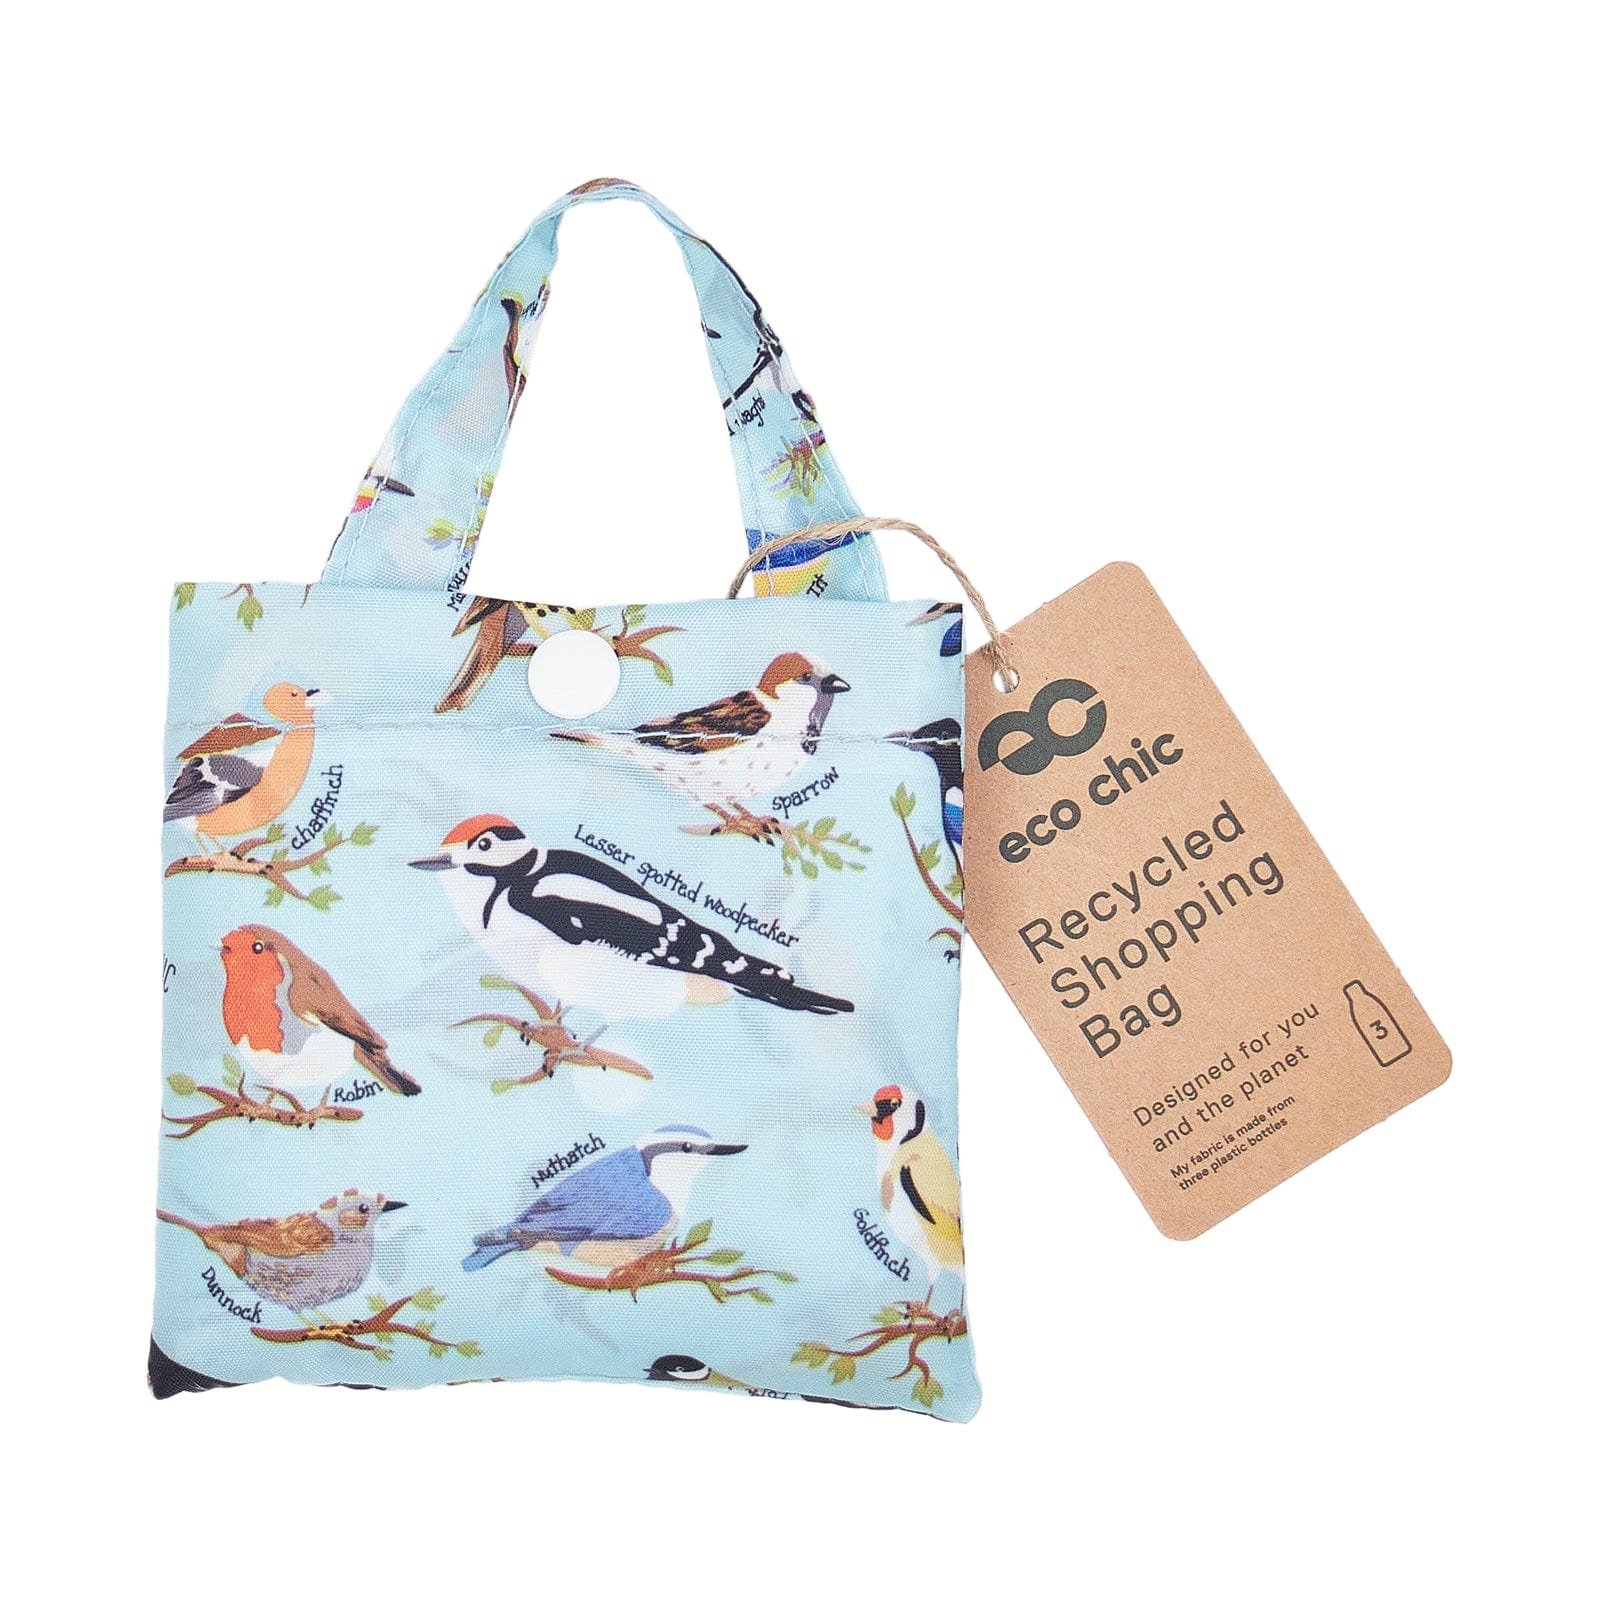 Eco Chic Eco Chic Lightweight Foldable Reusable Shopping Bag Wild Birds